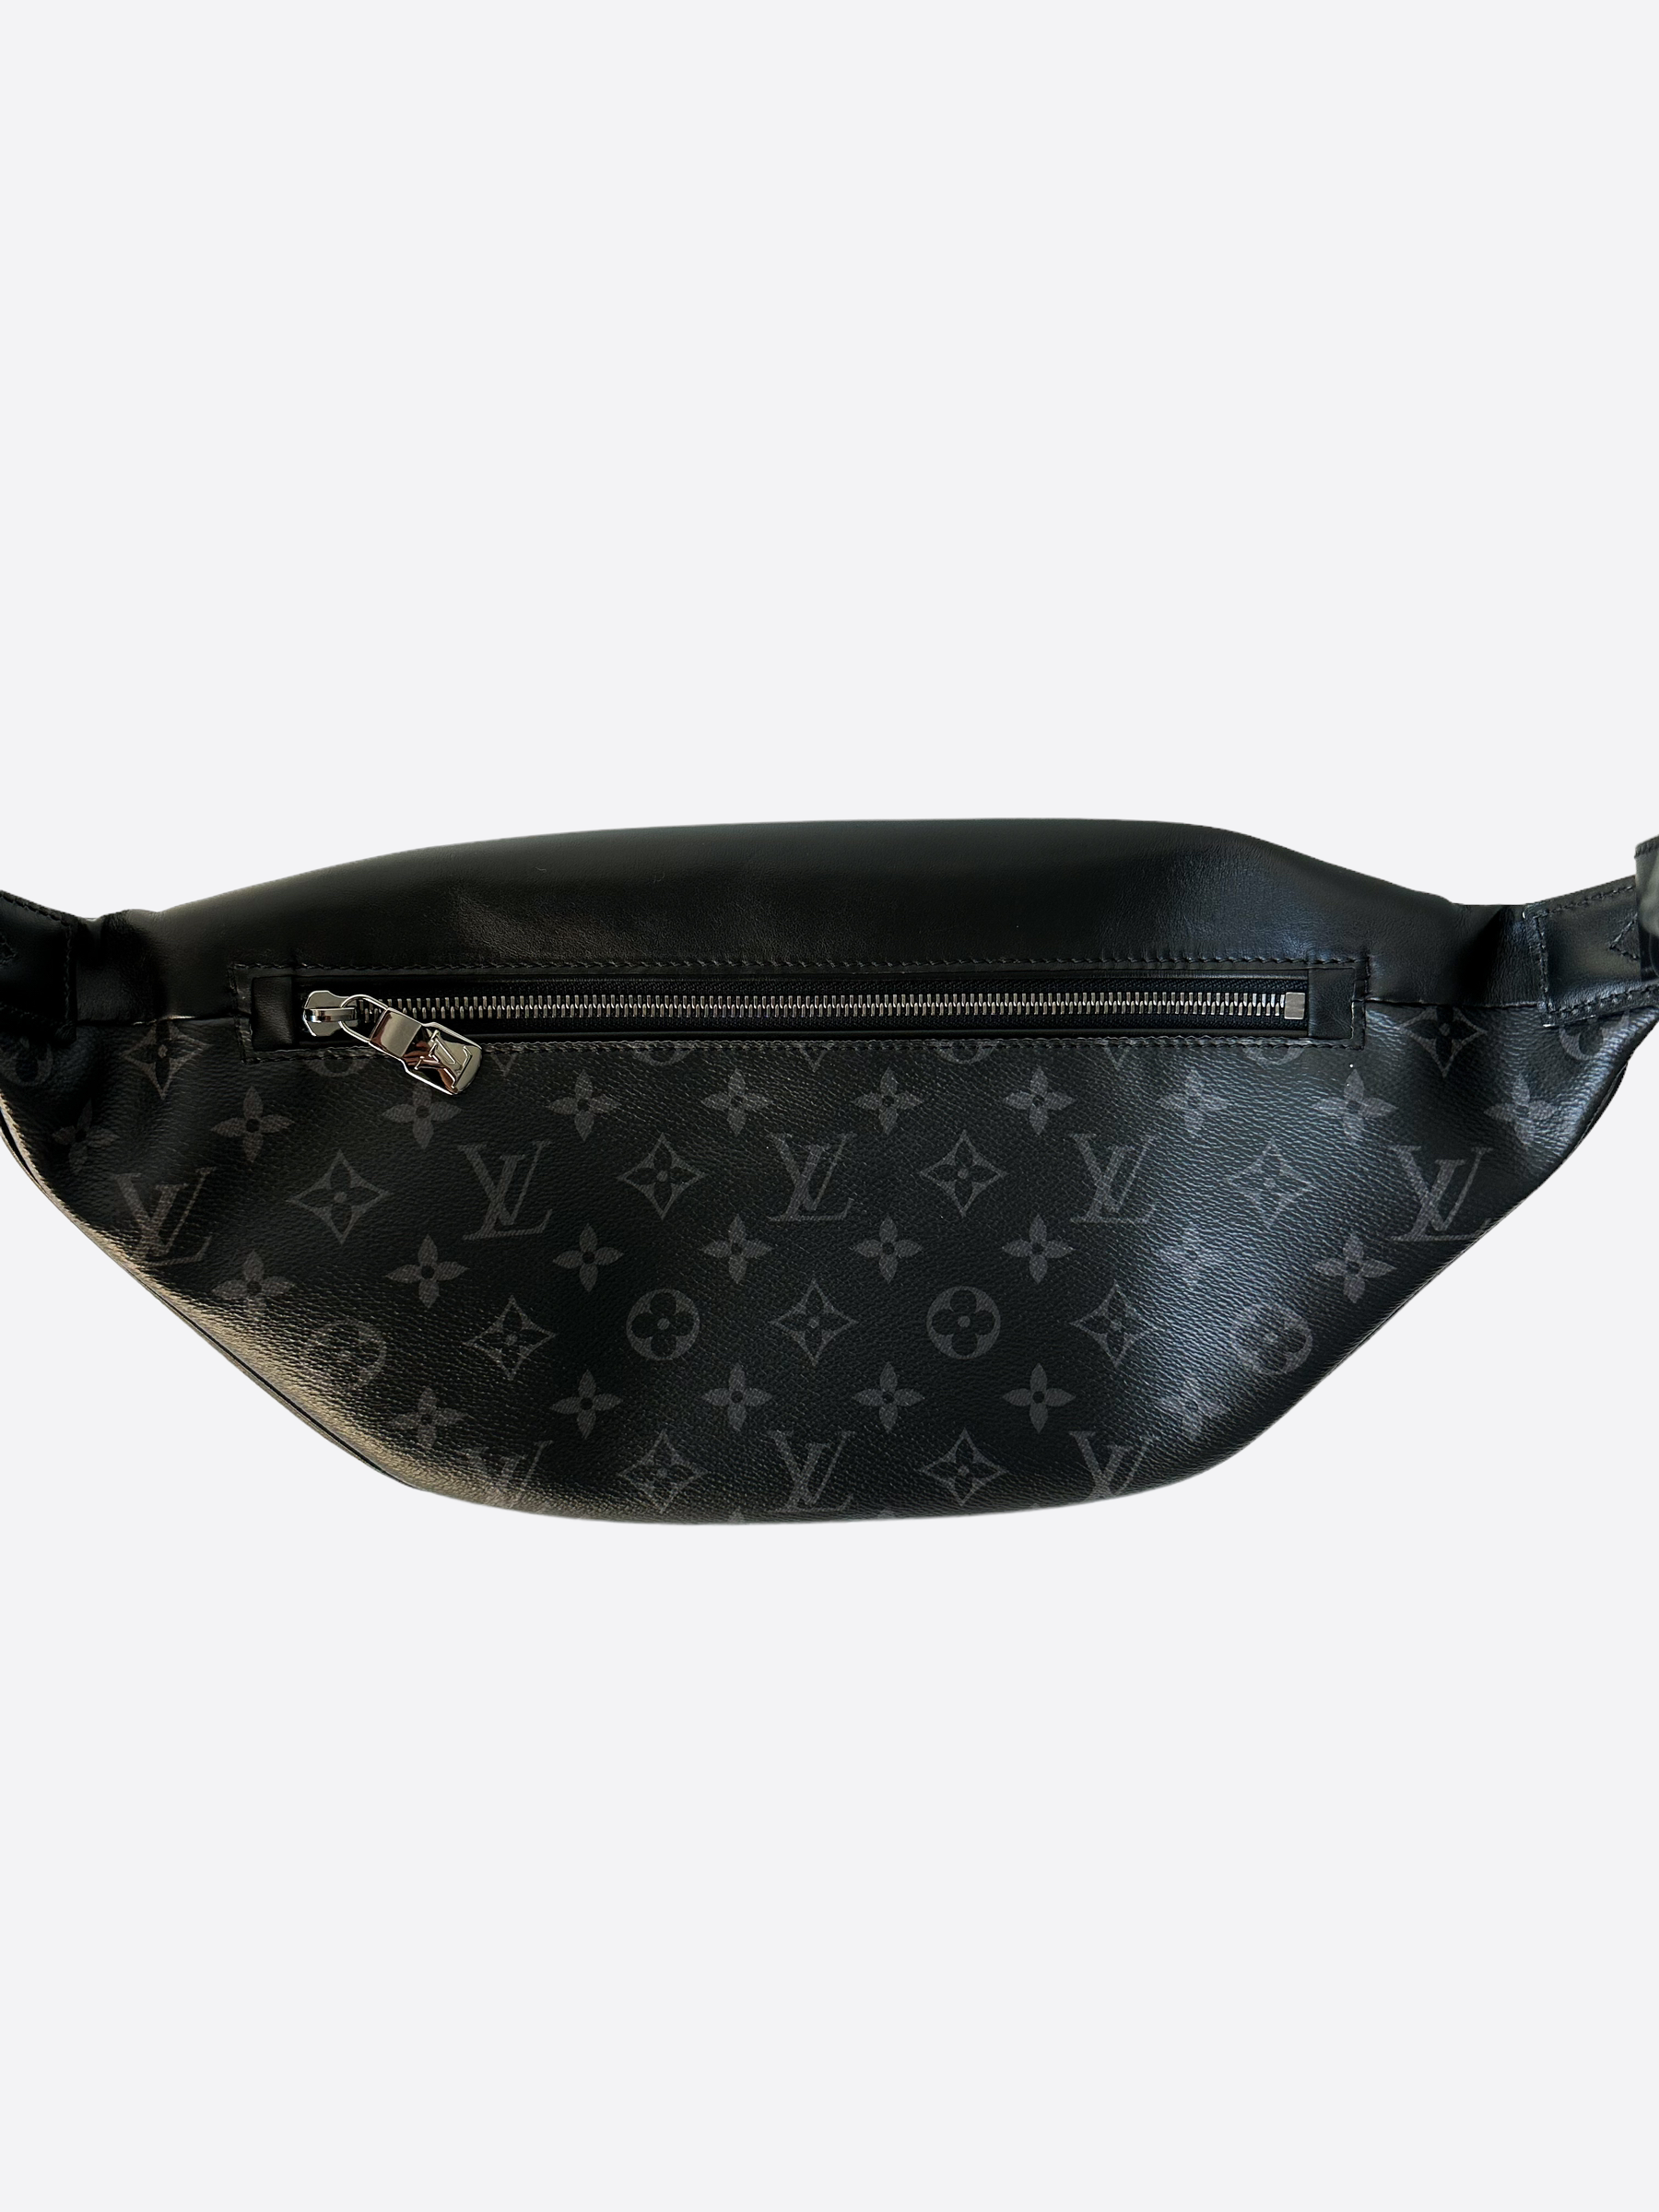 Louis Vuitton Discovery Discovery bumbag (M44336)